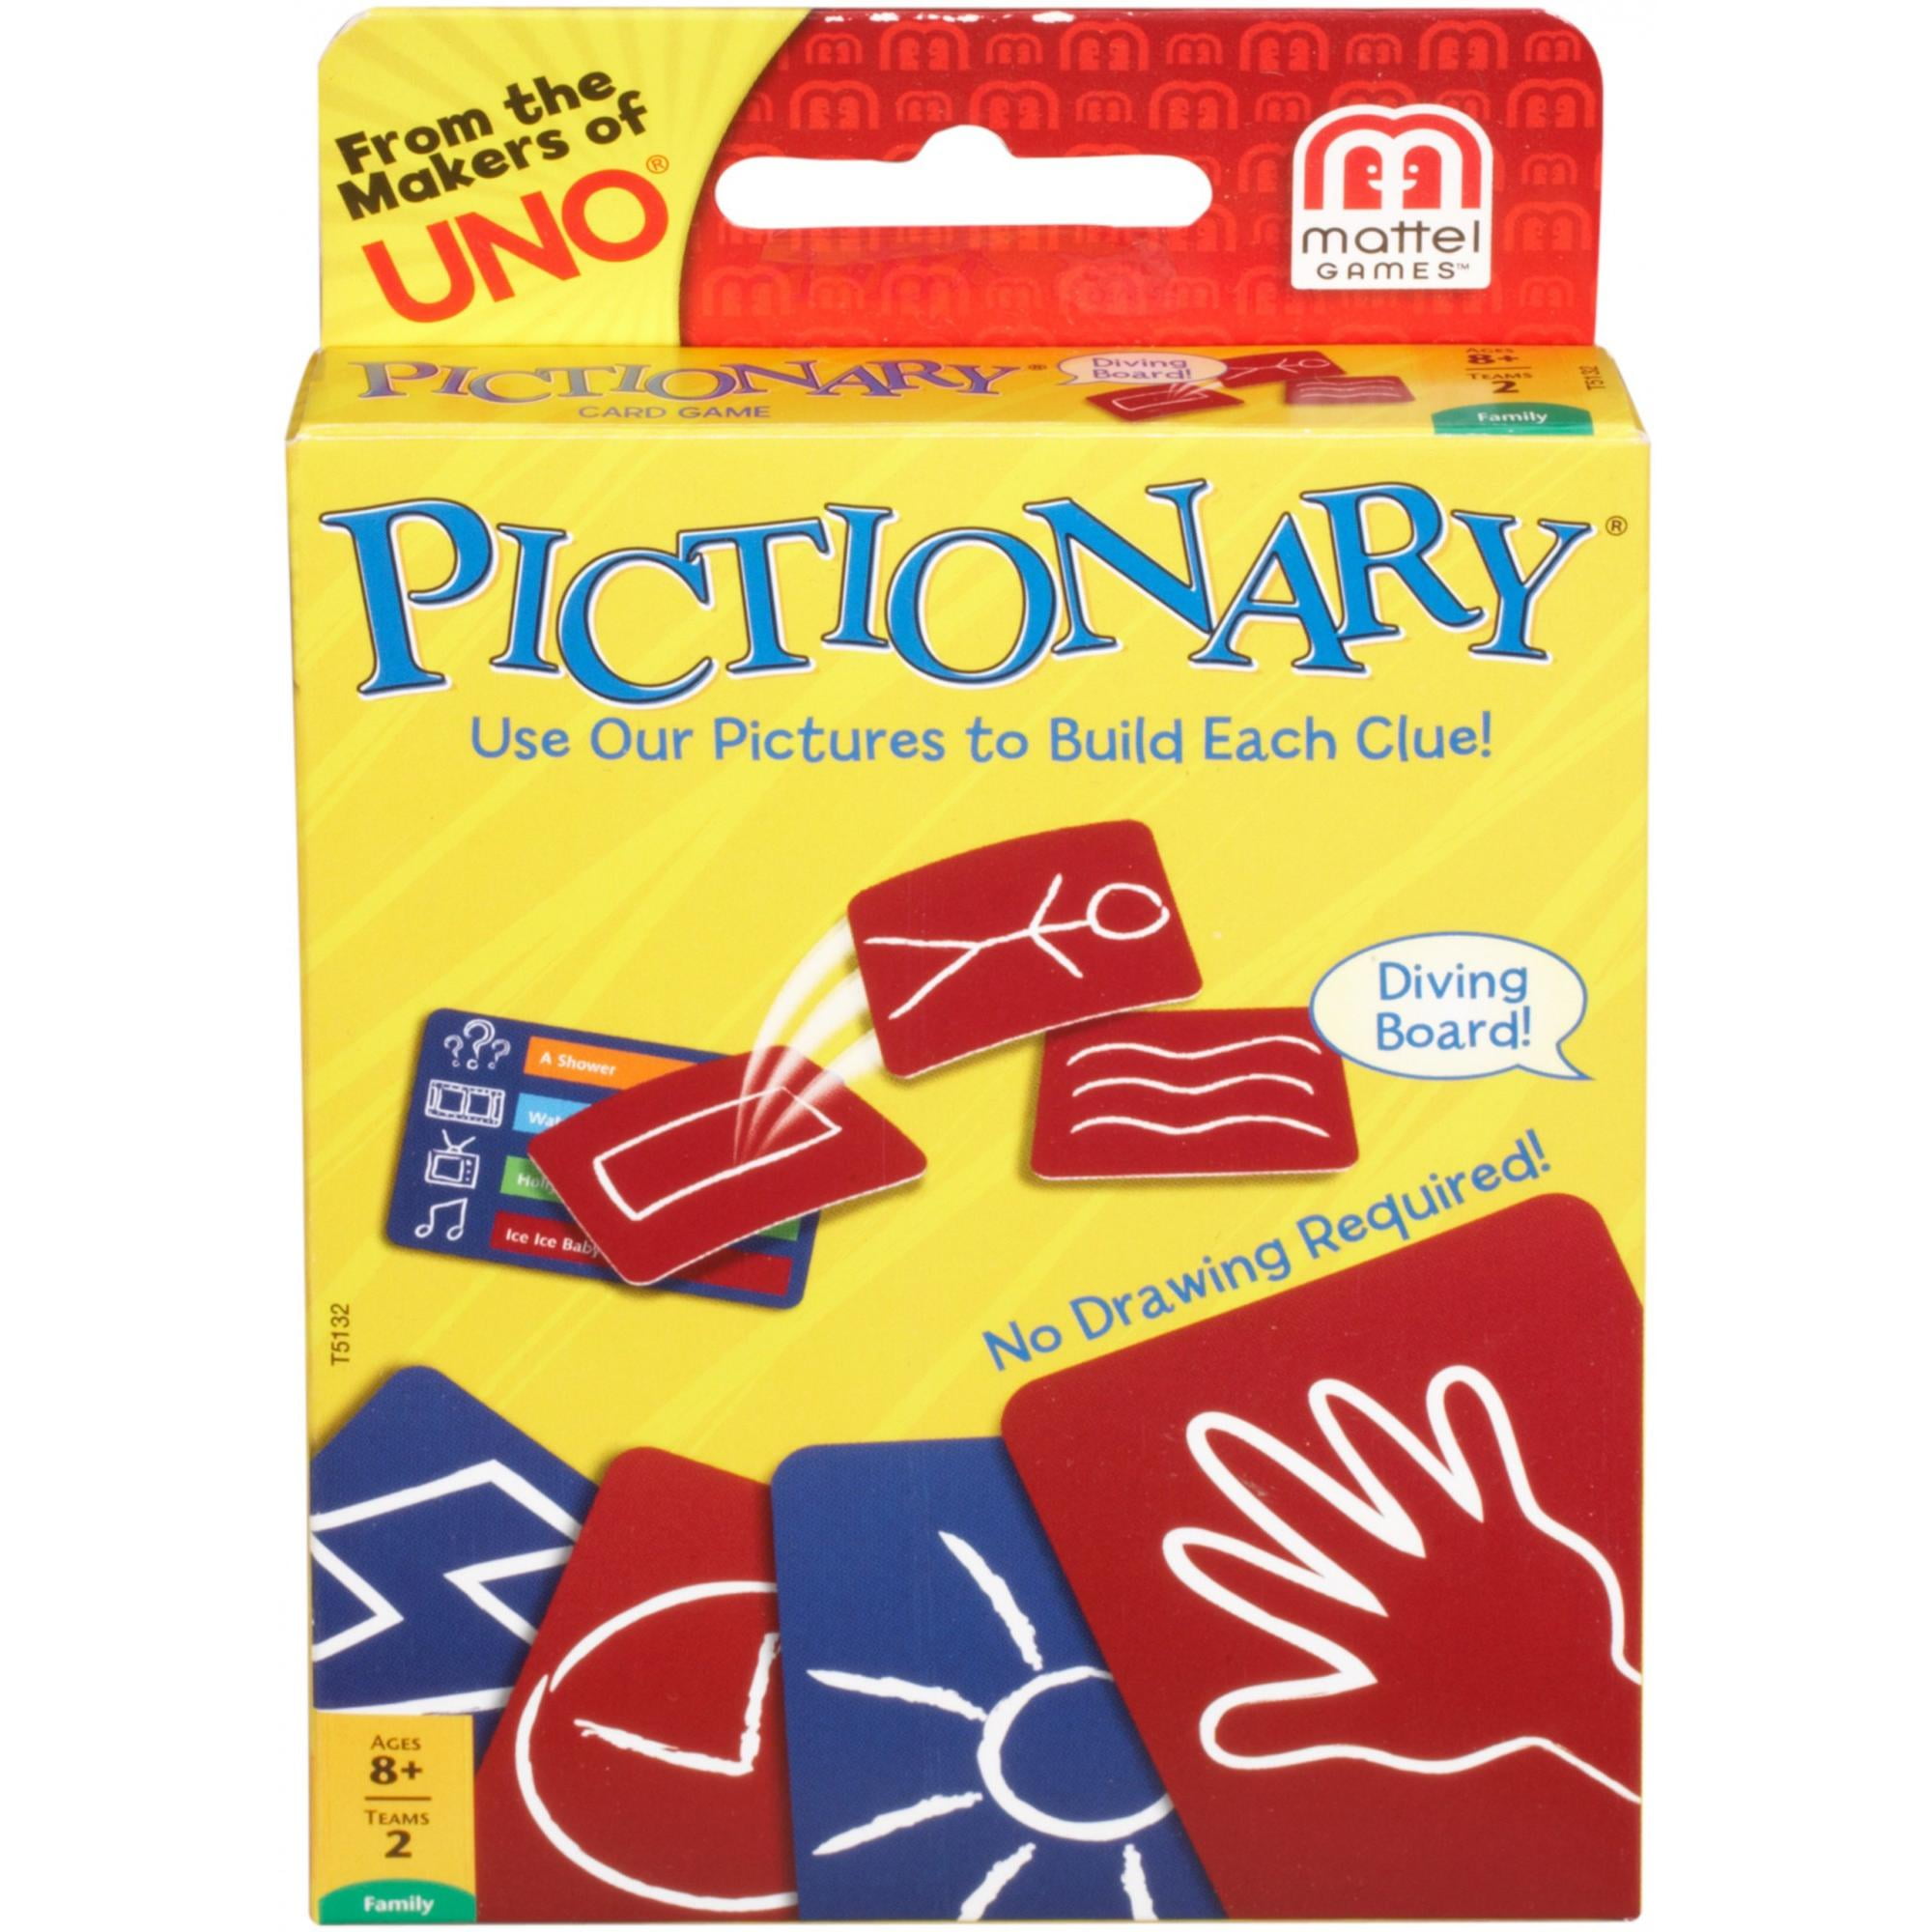 Pictionary 1993 Edition Game Tokens Category Cards Die Timer ONLY 